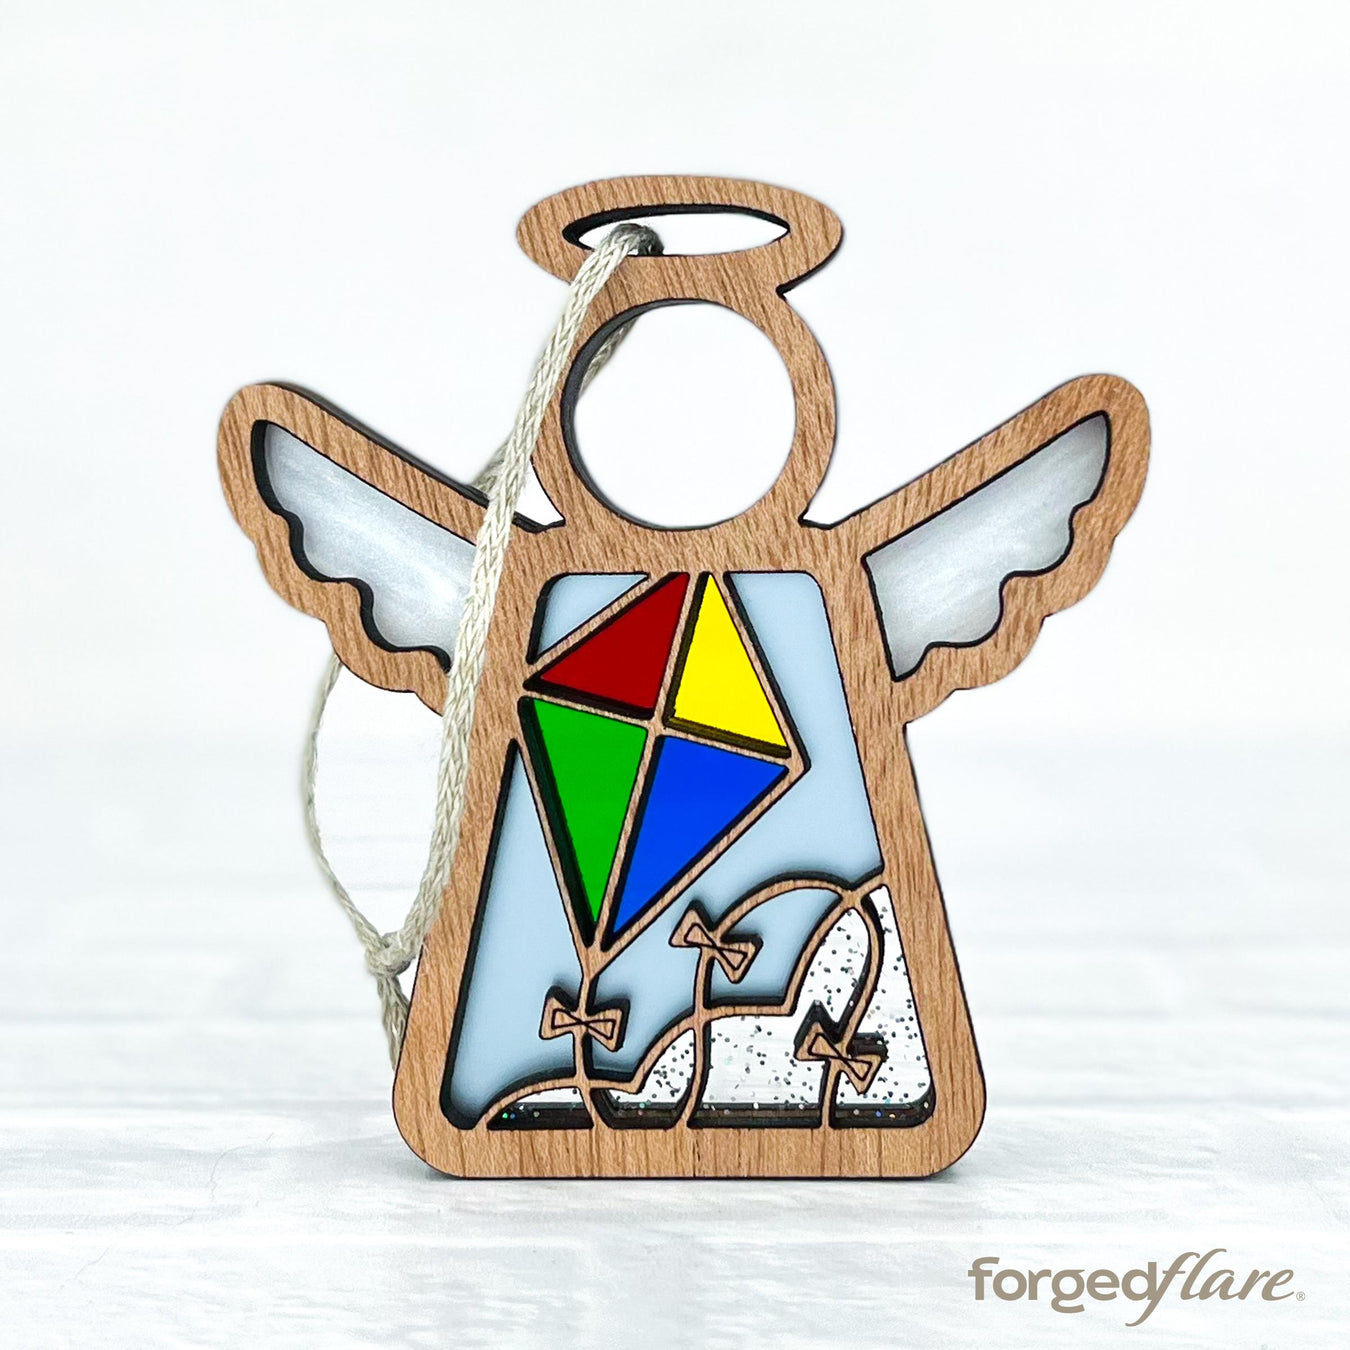 Fly a Kite for Charity Mother’s Angels ornament benefiting Youth Villages.